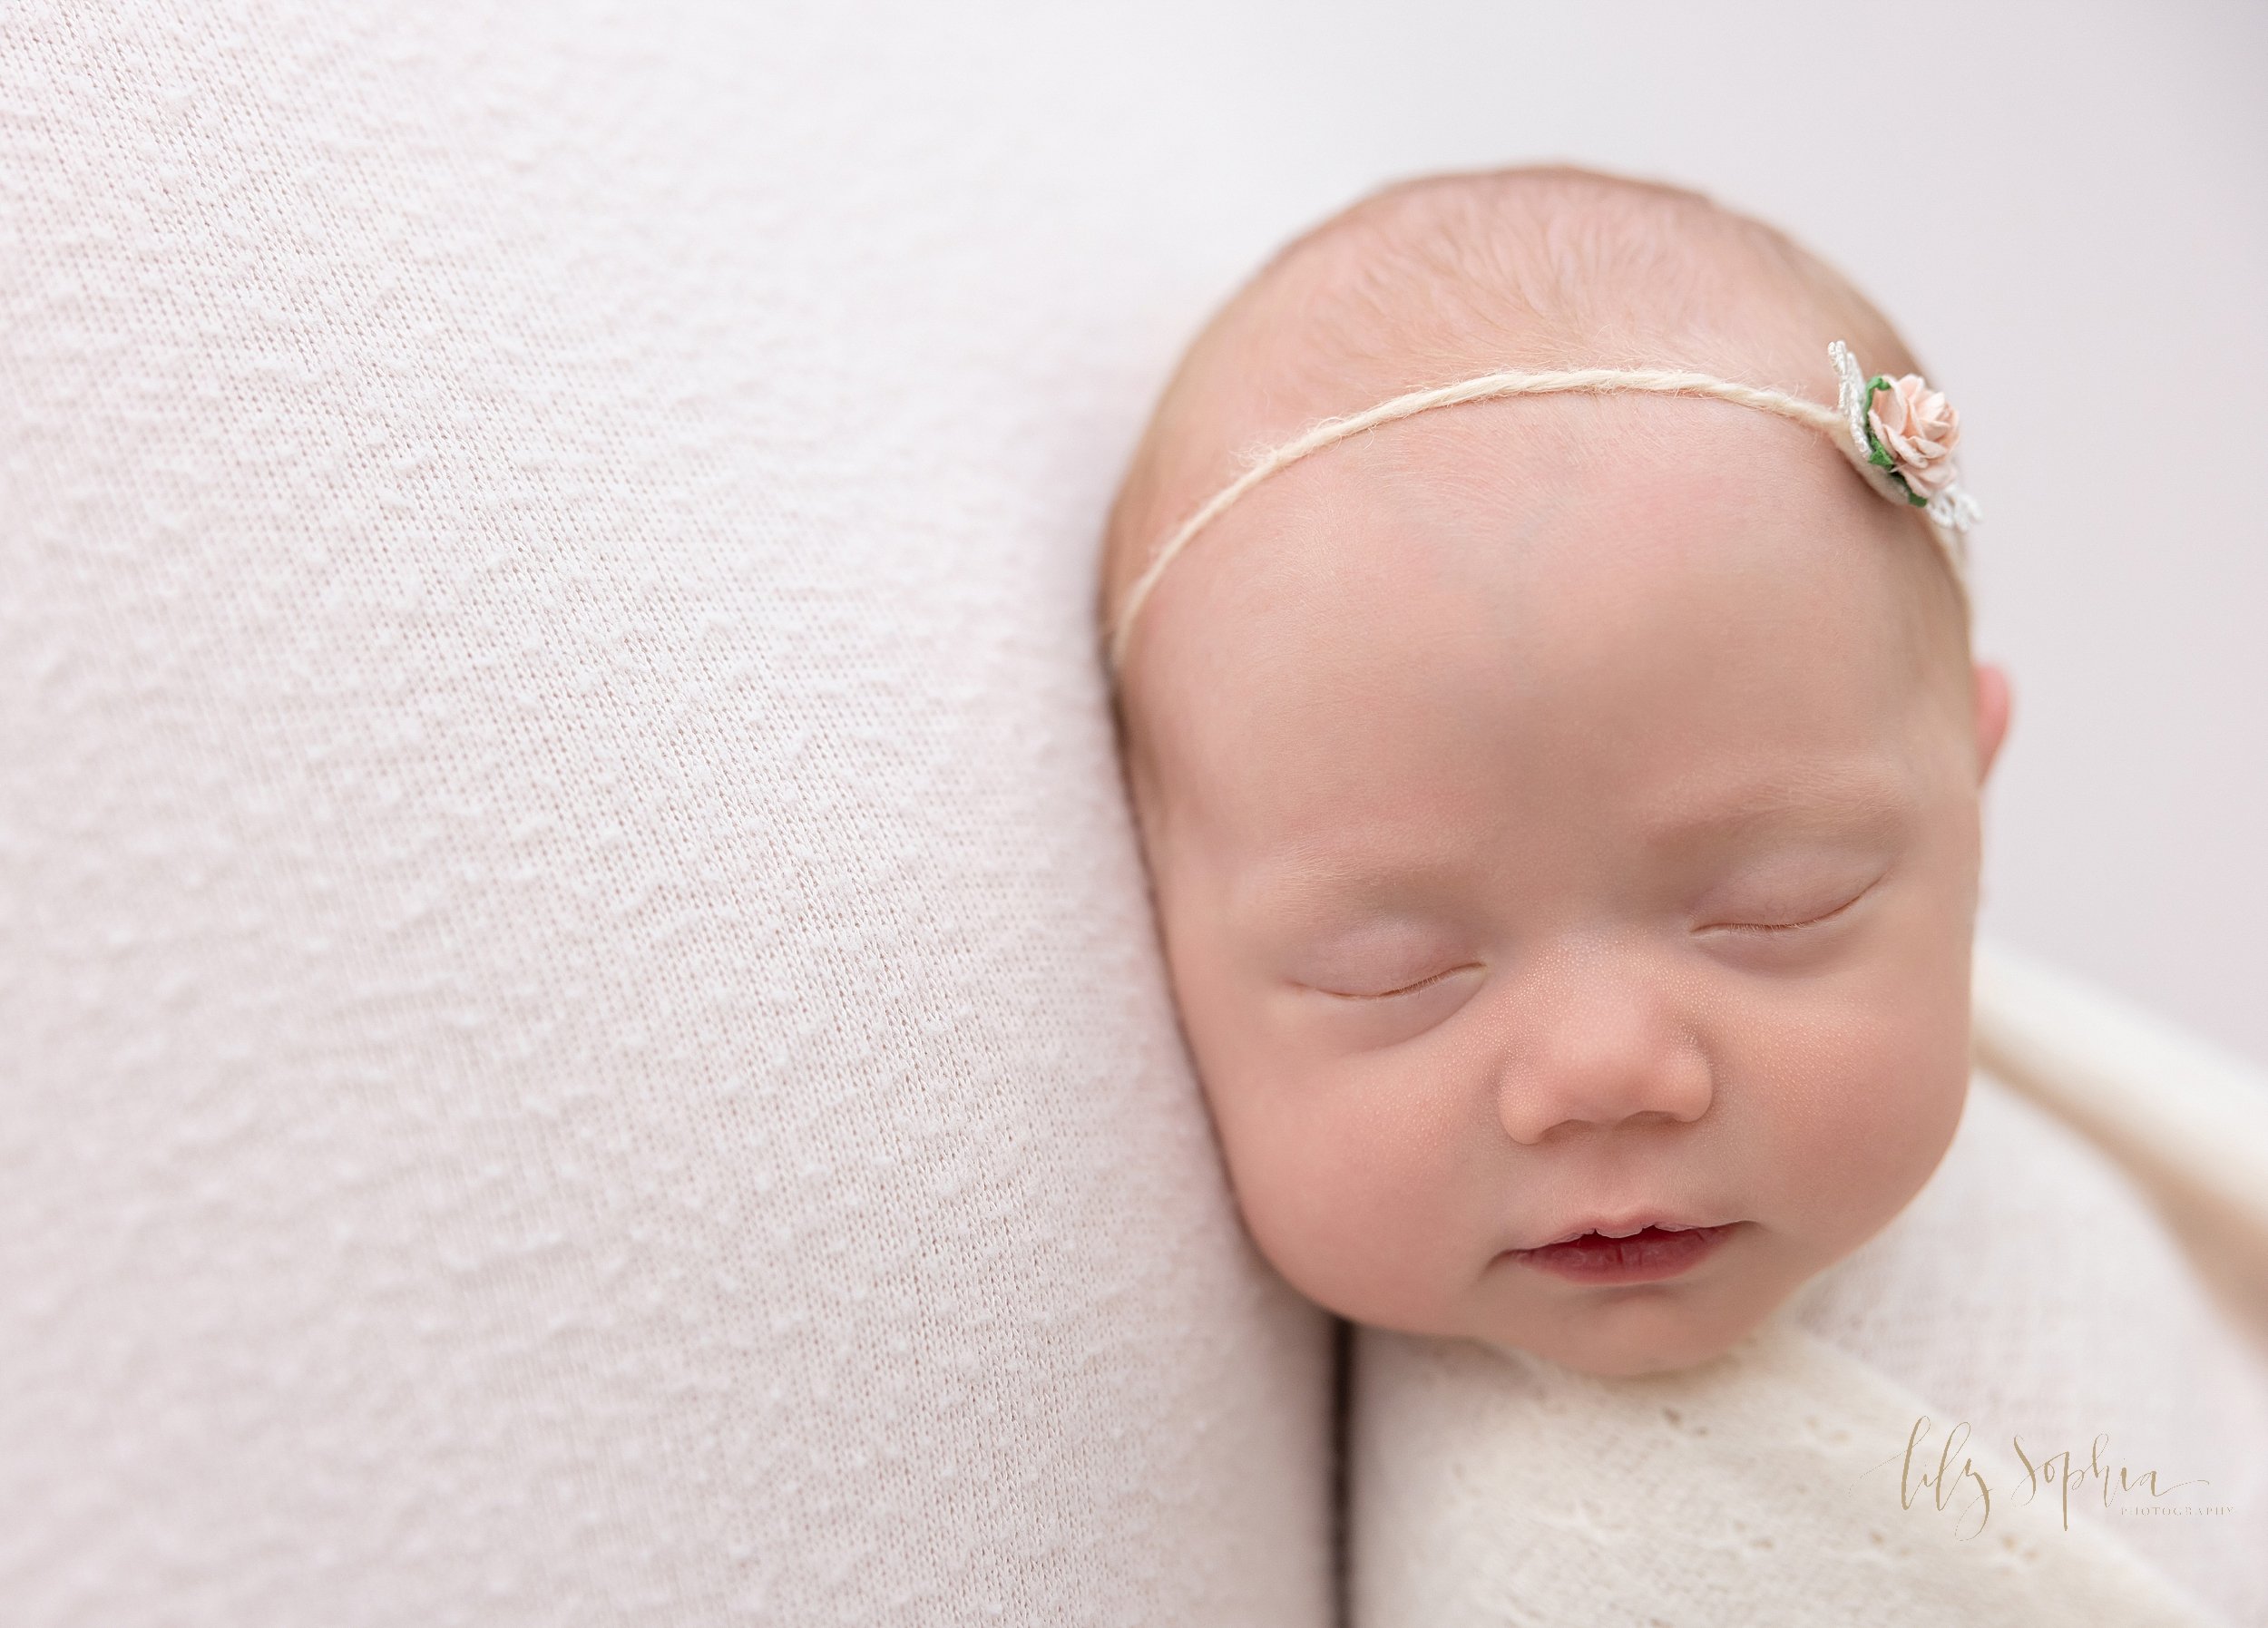  Newborn photo shoot of a beautiful newborn baby girl as she lies on her back wearing a headband adorning a single rose as she is swaddled to her chin with a soft white blanket taken in a natural light studio near Old Fourth Ward in Atlanta, Georgia.